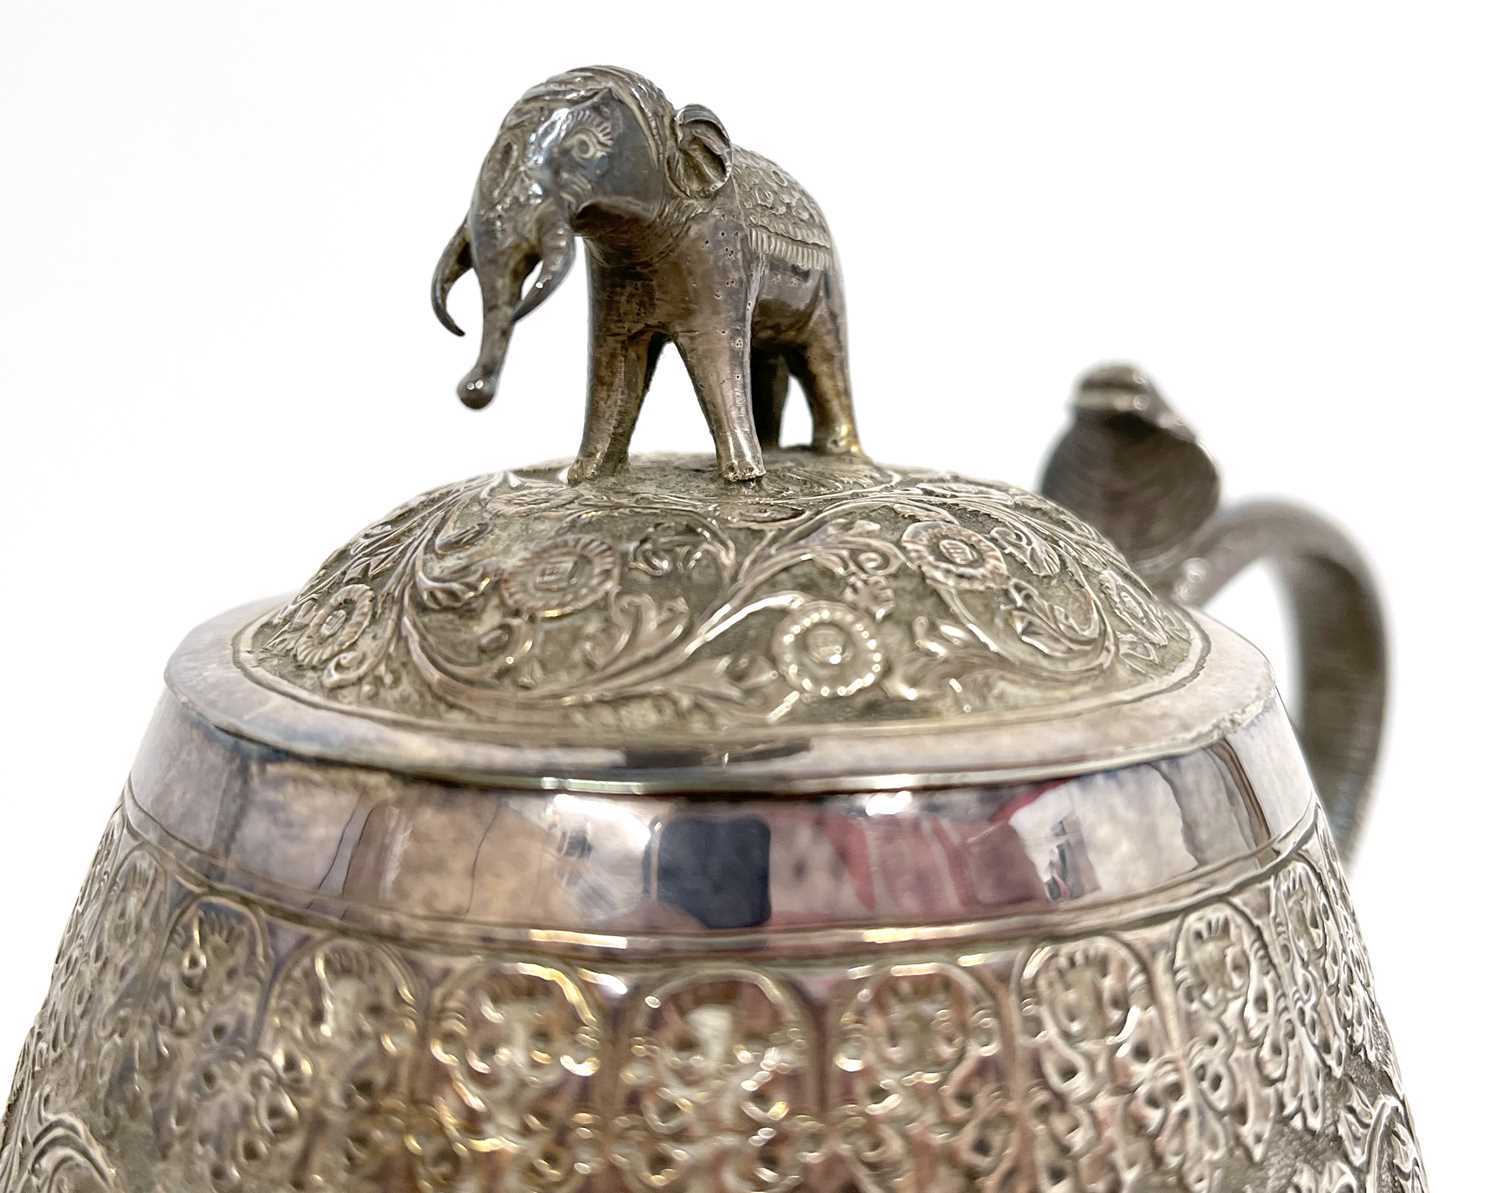 Antique Indian silver tea set 'Lucknow Circa 1900' with elephant and cobra design, comprising - Image 15 of 23